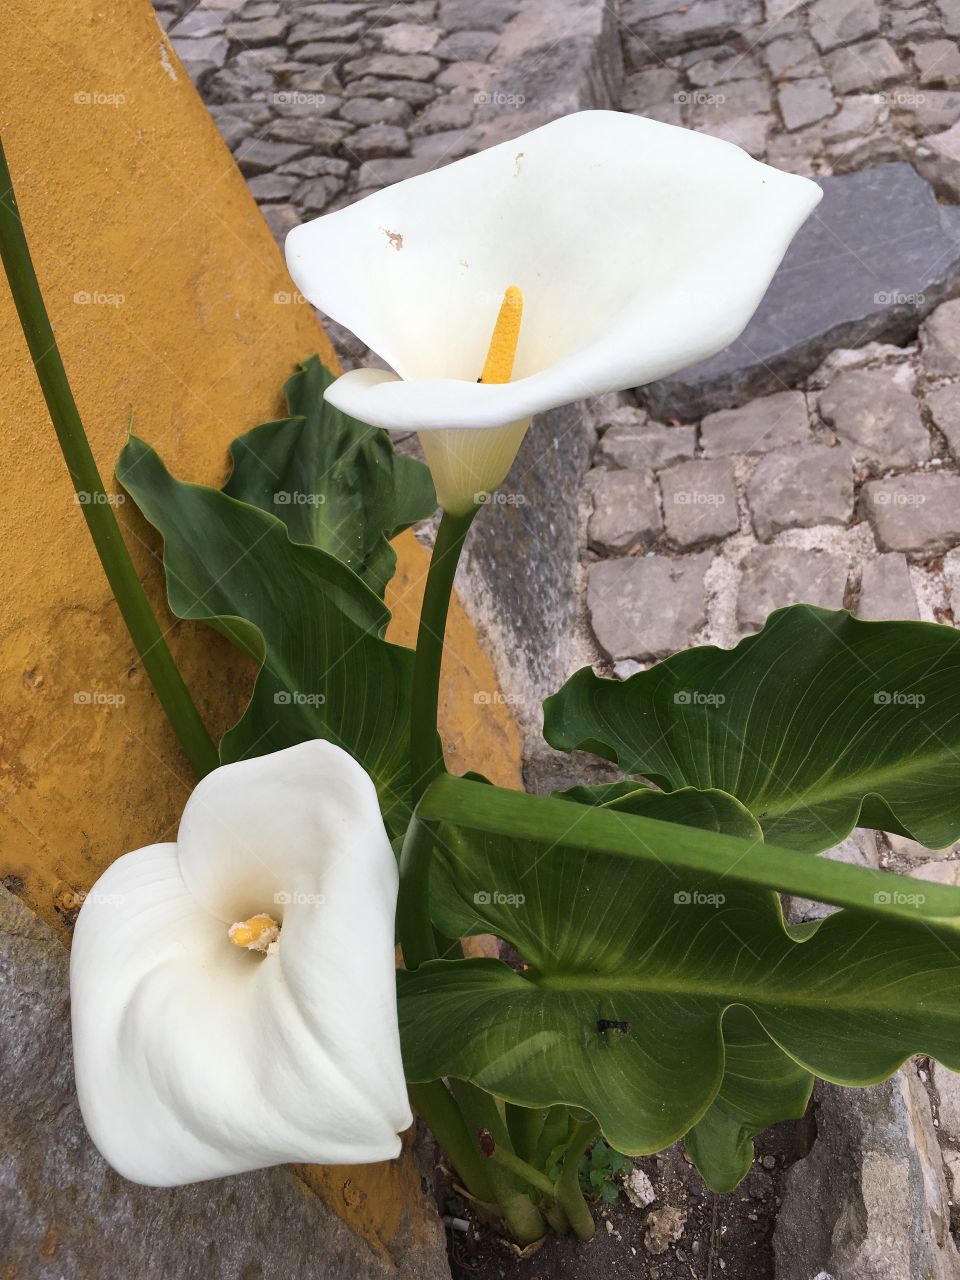 Flowers in Portugal